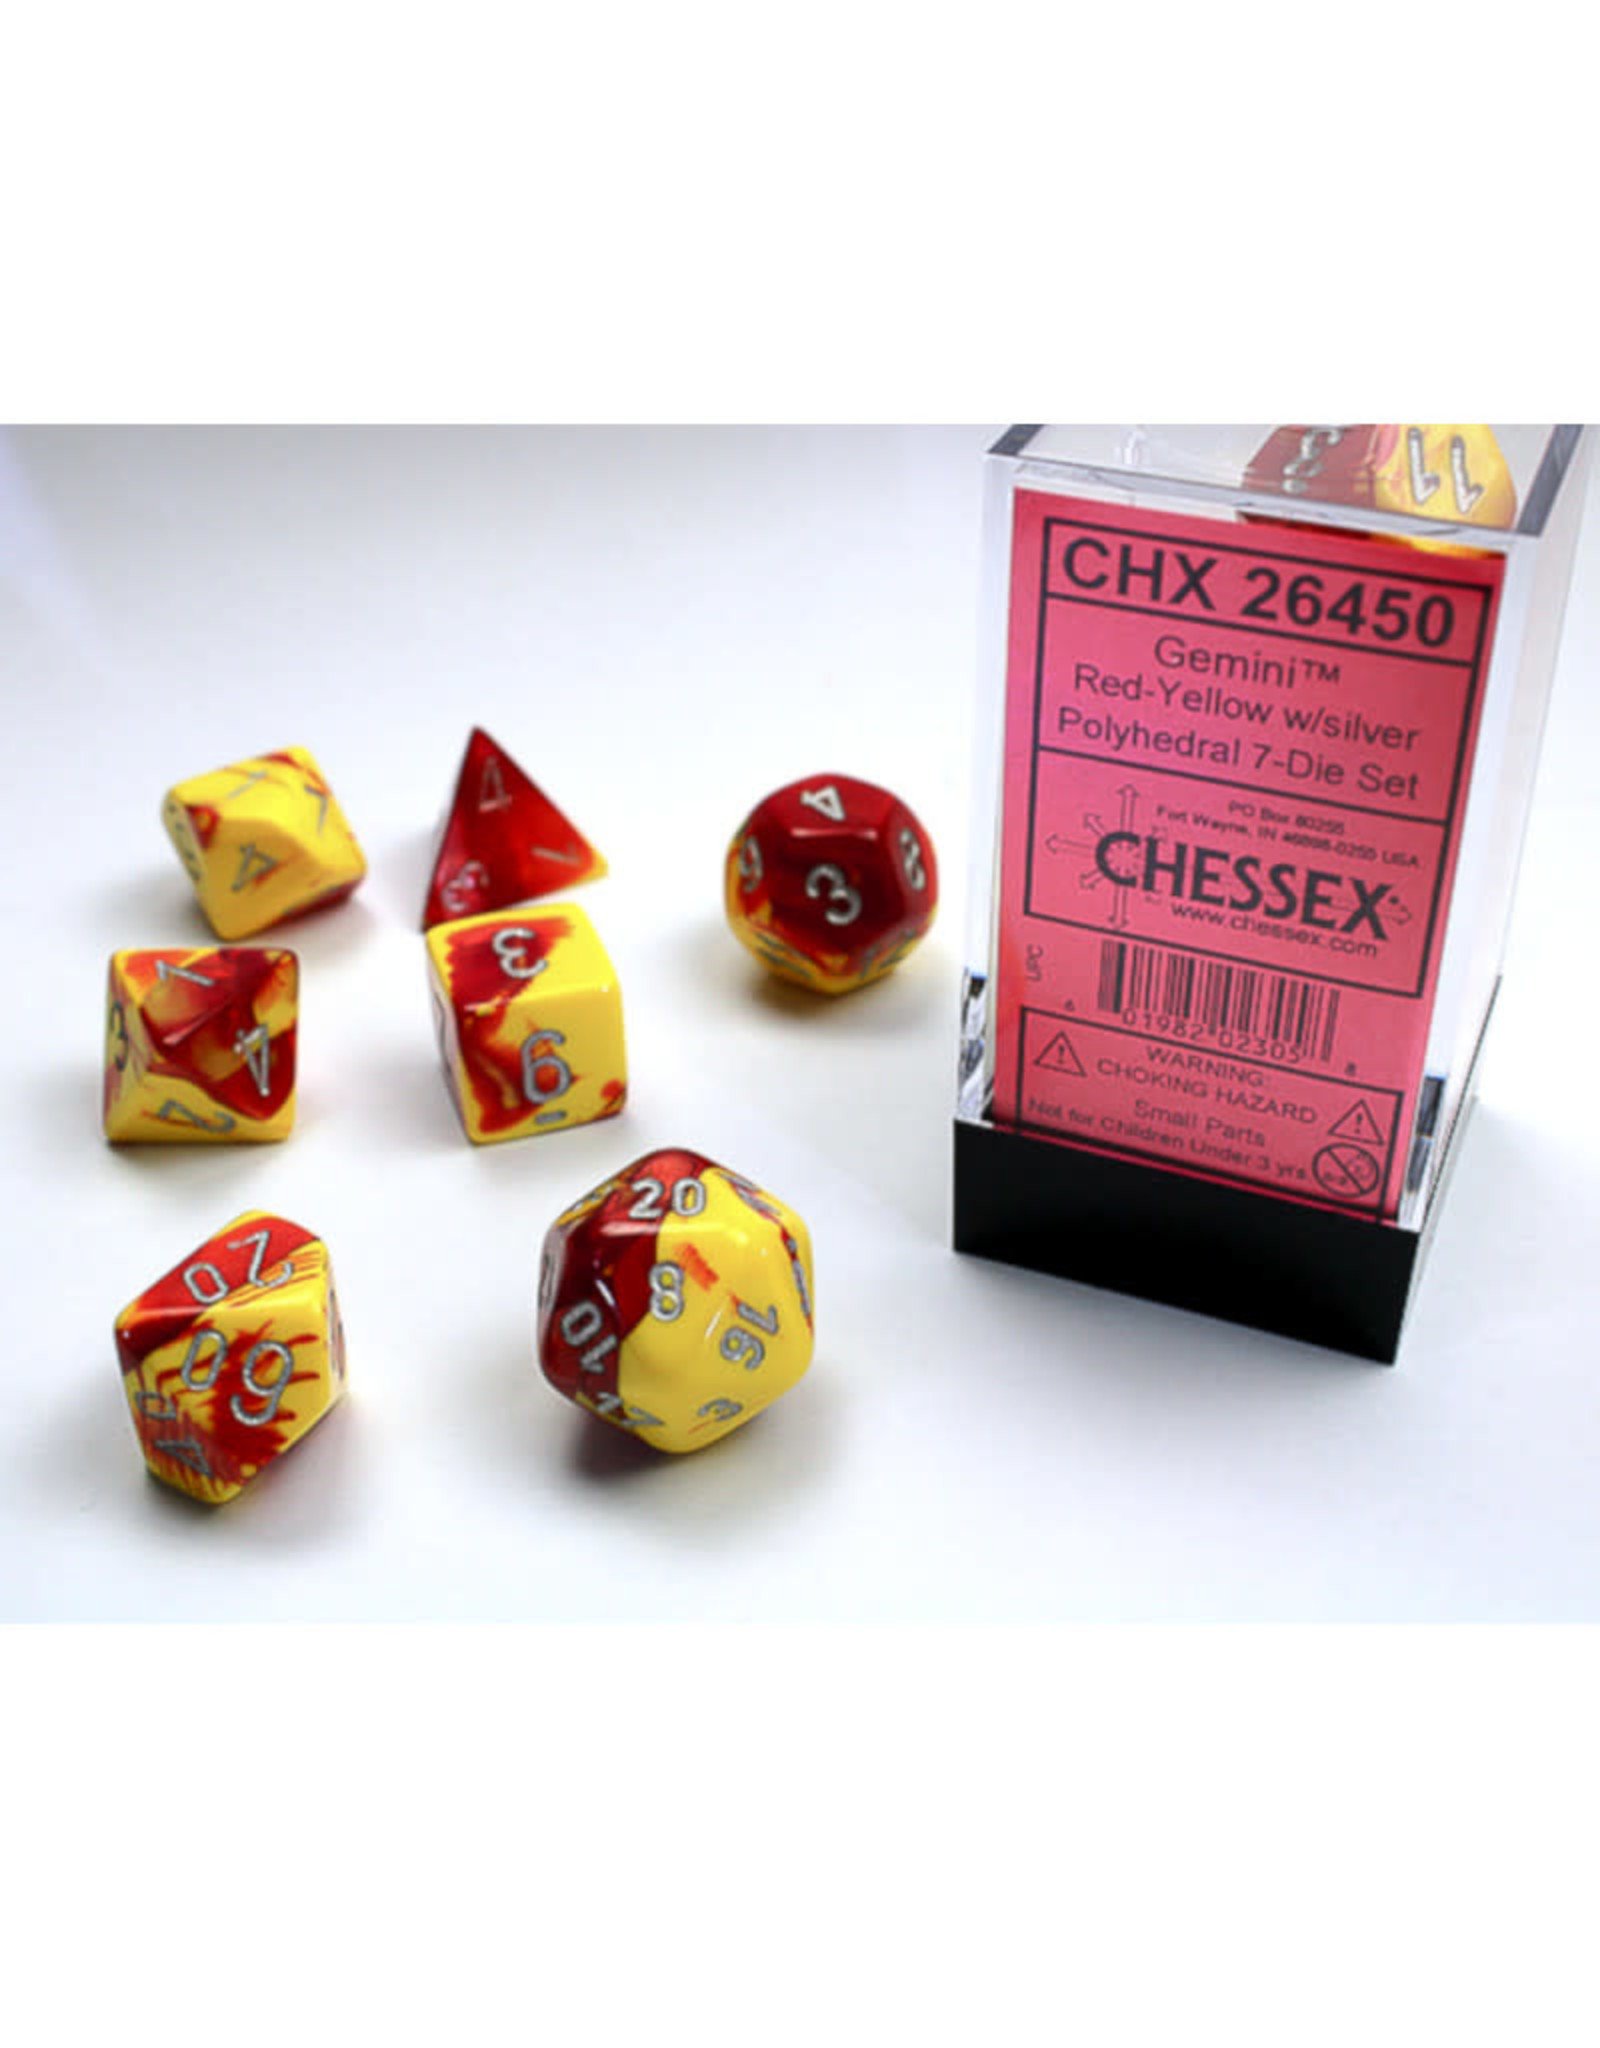 Chessex Polyhedral Dice Set: Gemini Red Yellow/Silver (7)